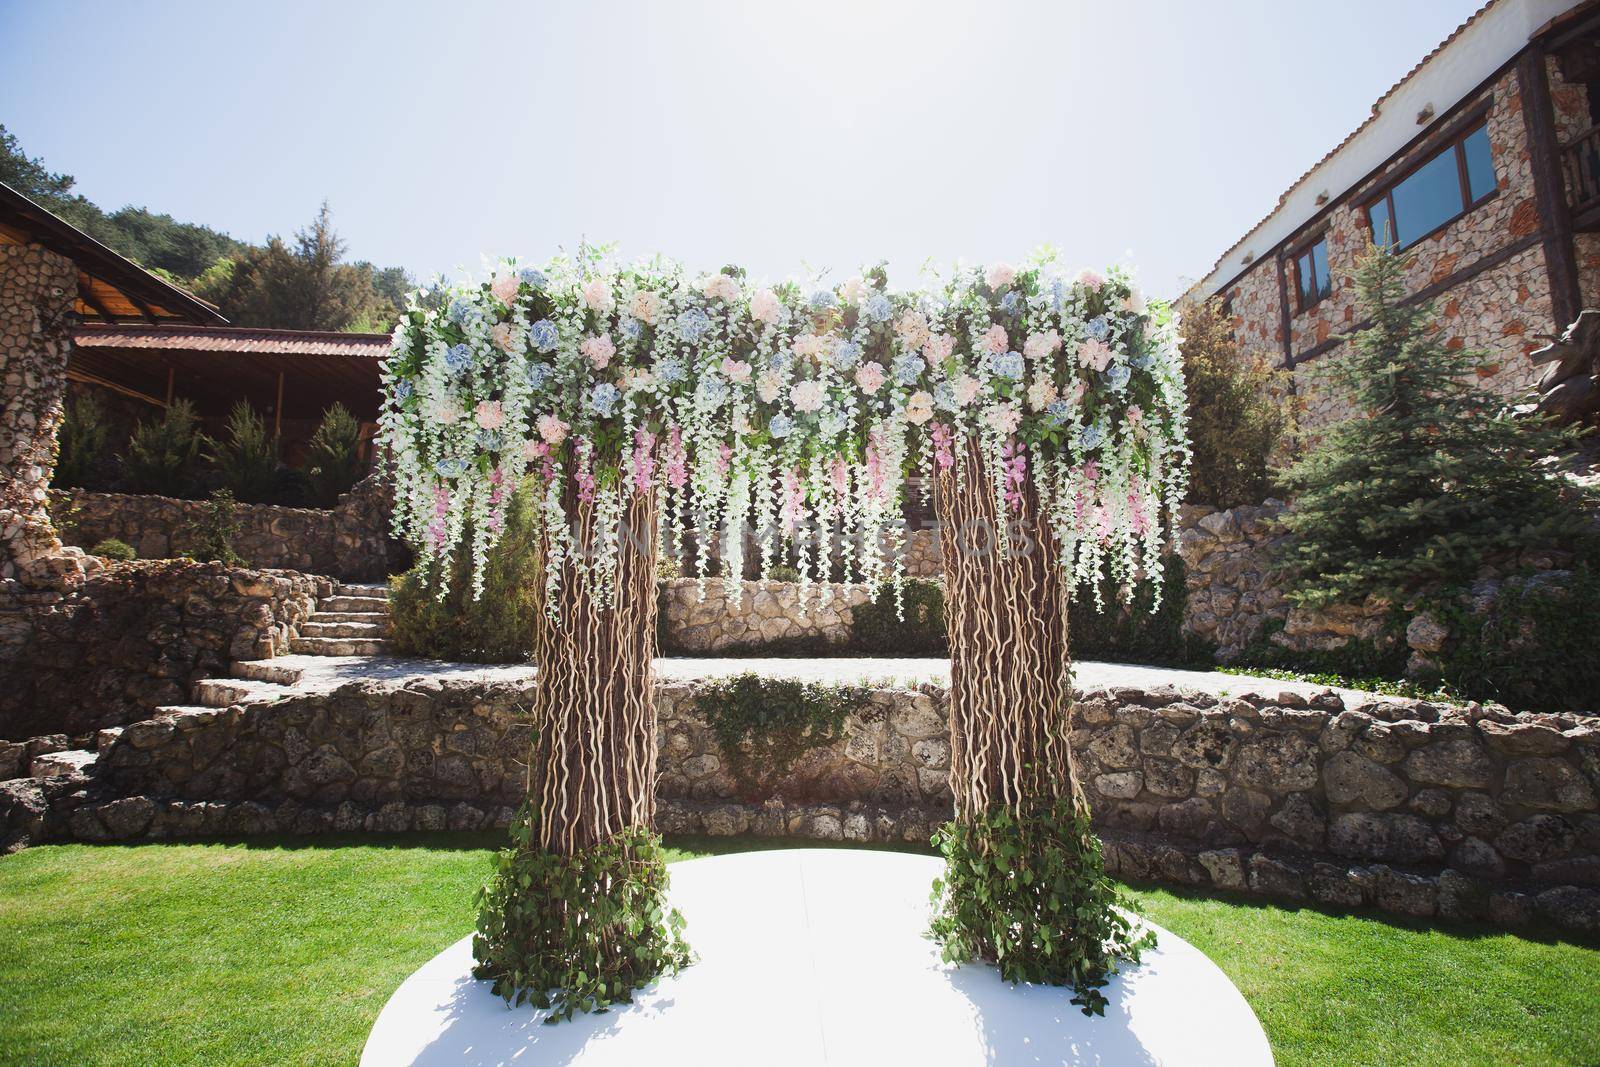 Outdoor wedding ceremony decoration at the hotel. by StudioPeace